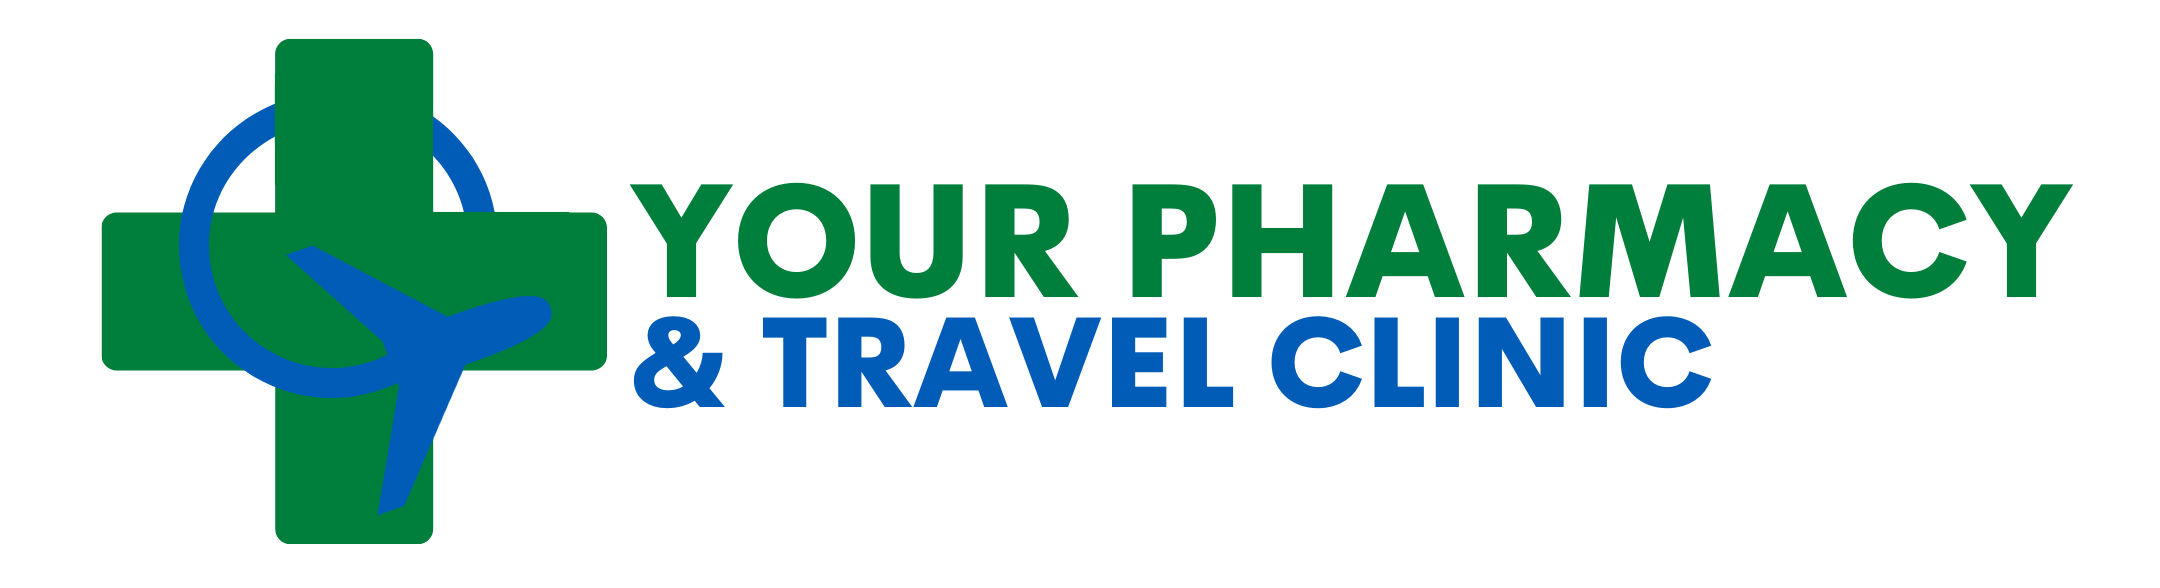 Your Pharmacy & Travel Clinic